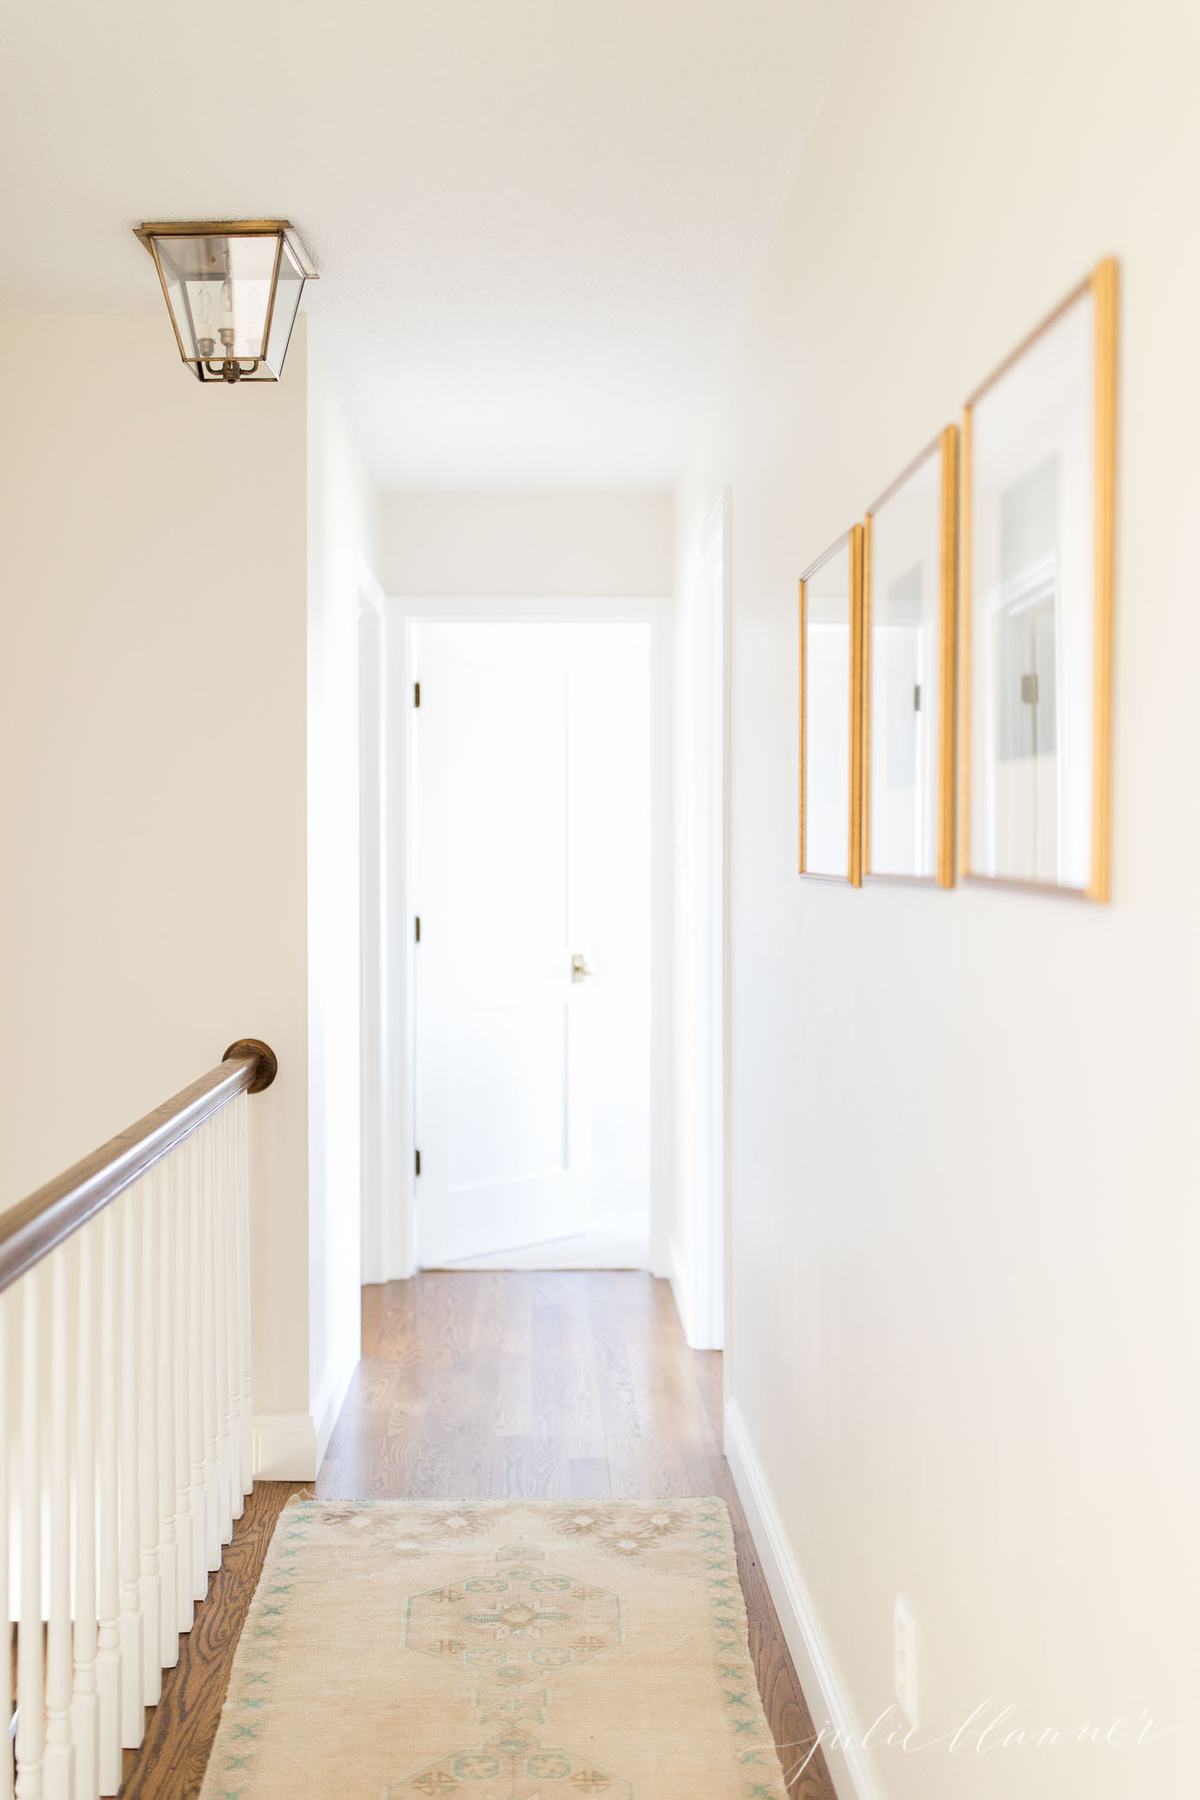 A light filled small hallway in the upstairs of a vintage home